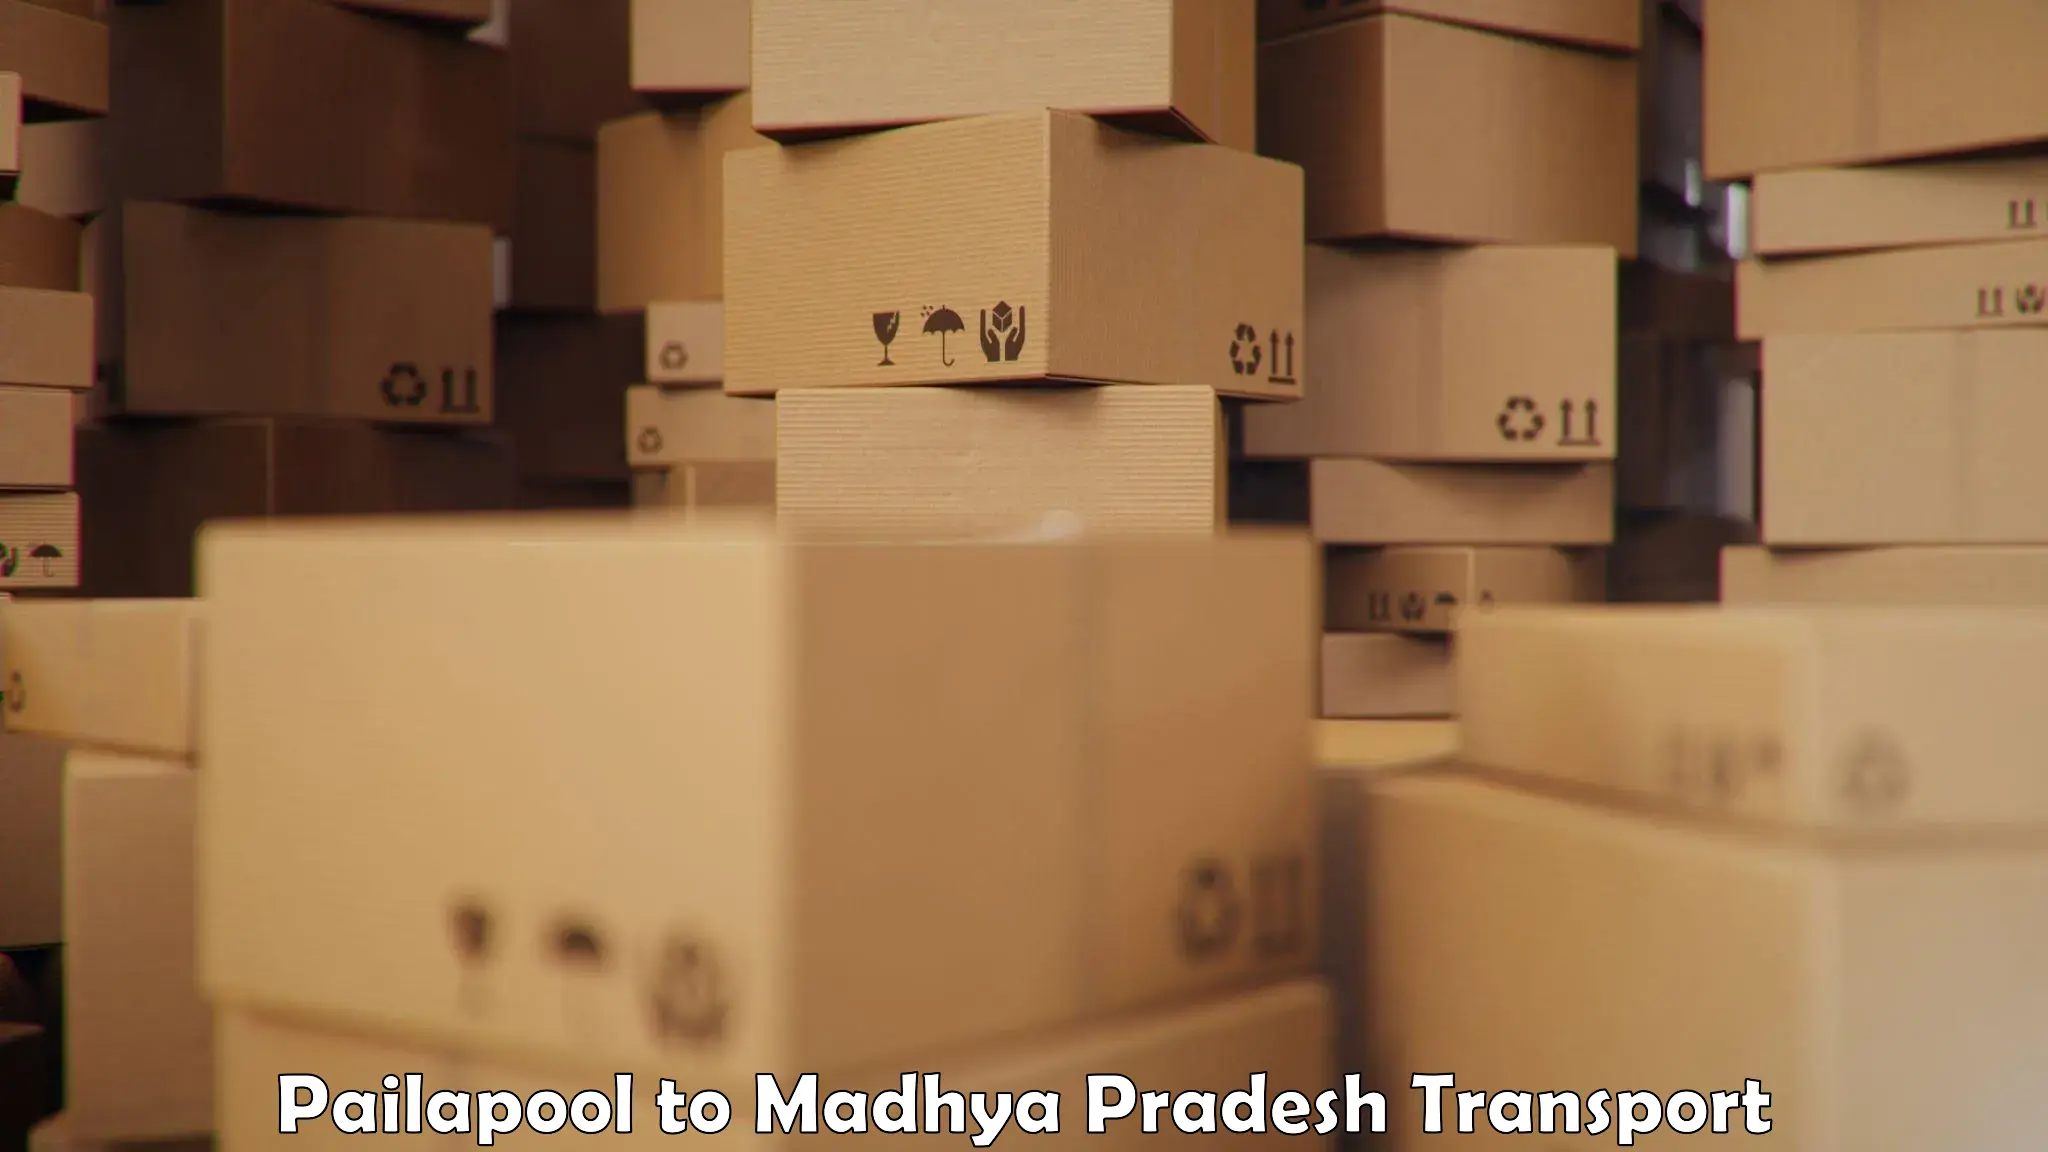 Truck transport companies in India Pailapool to Chandla